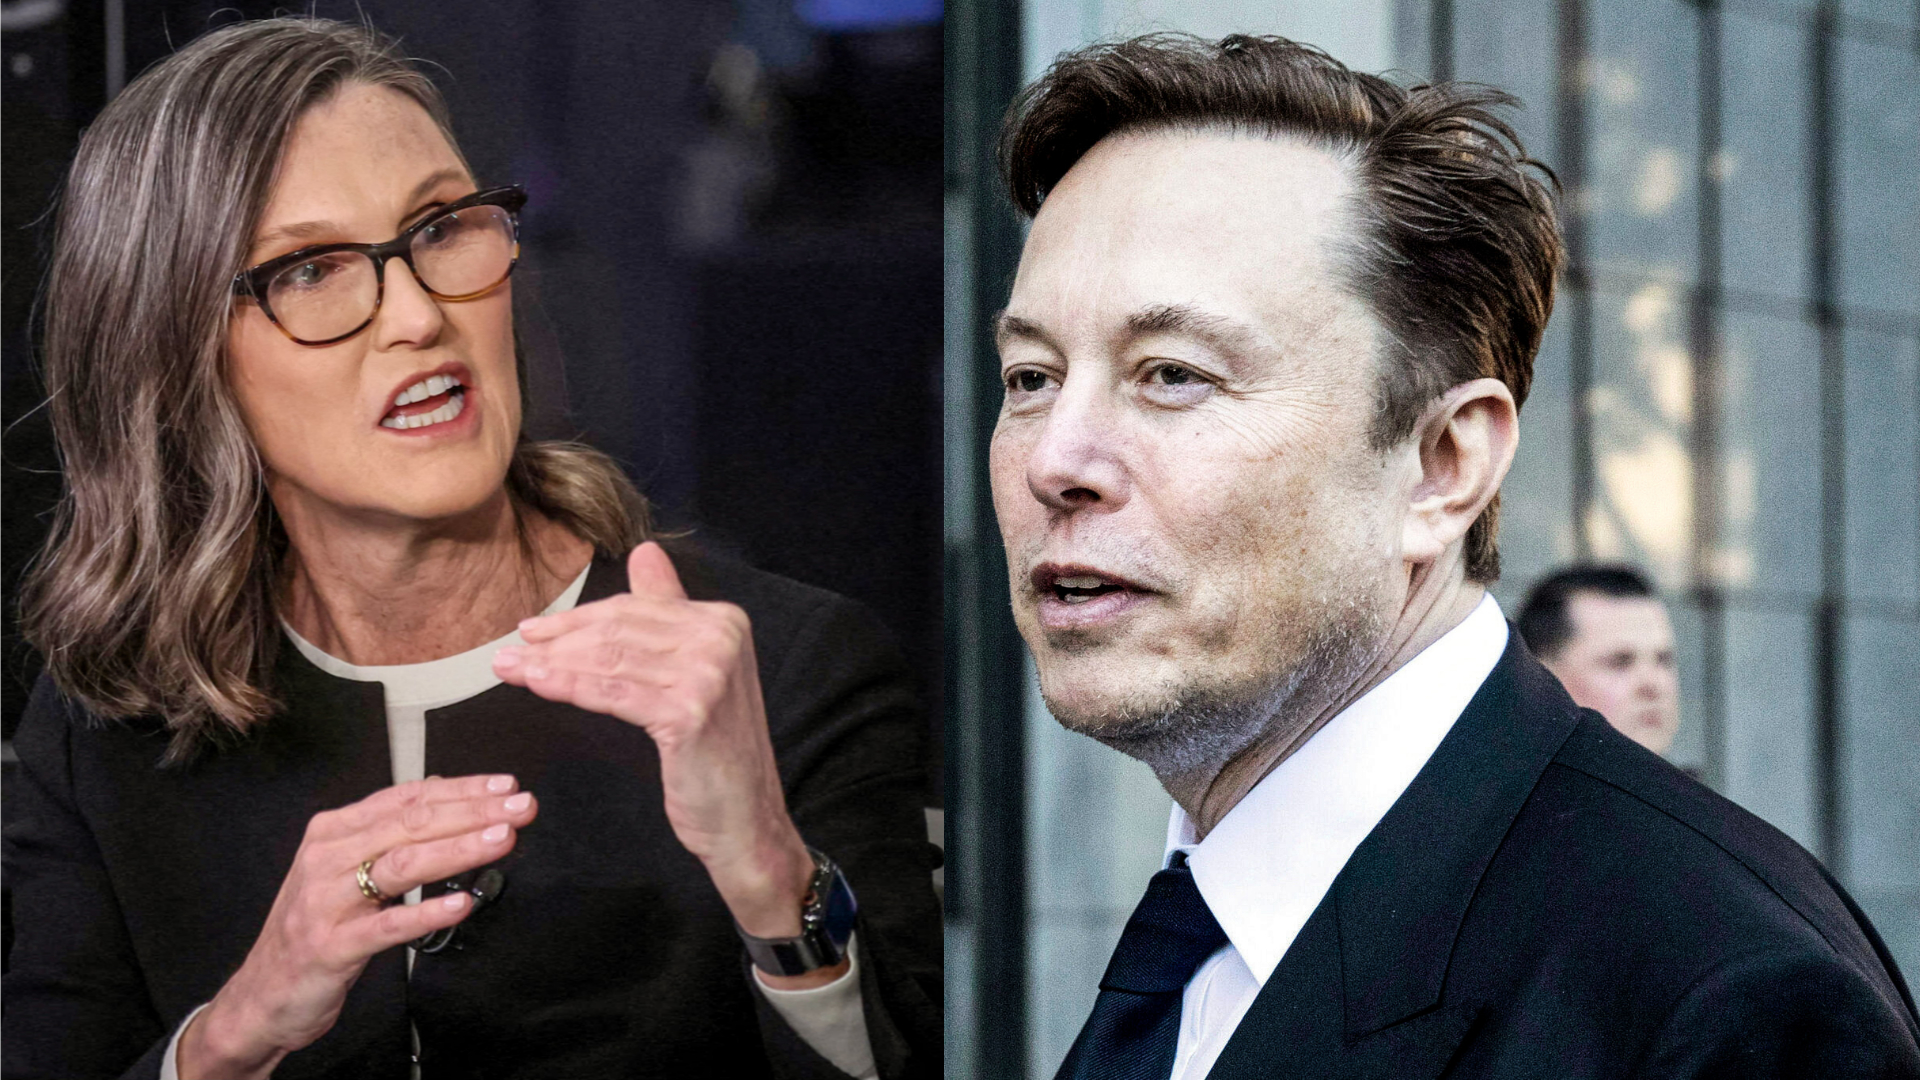 Tech investor Cathie Wood says Elon Musk's Tesla could be a big AI winner – and its stock isn't overpriced